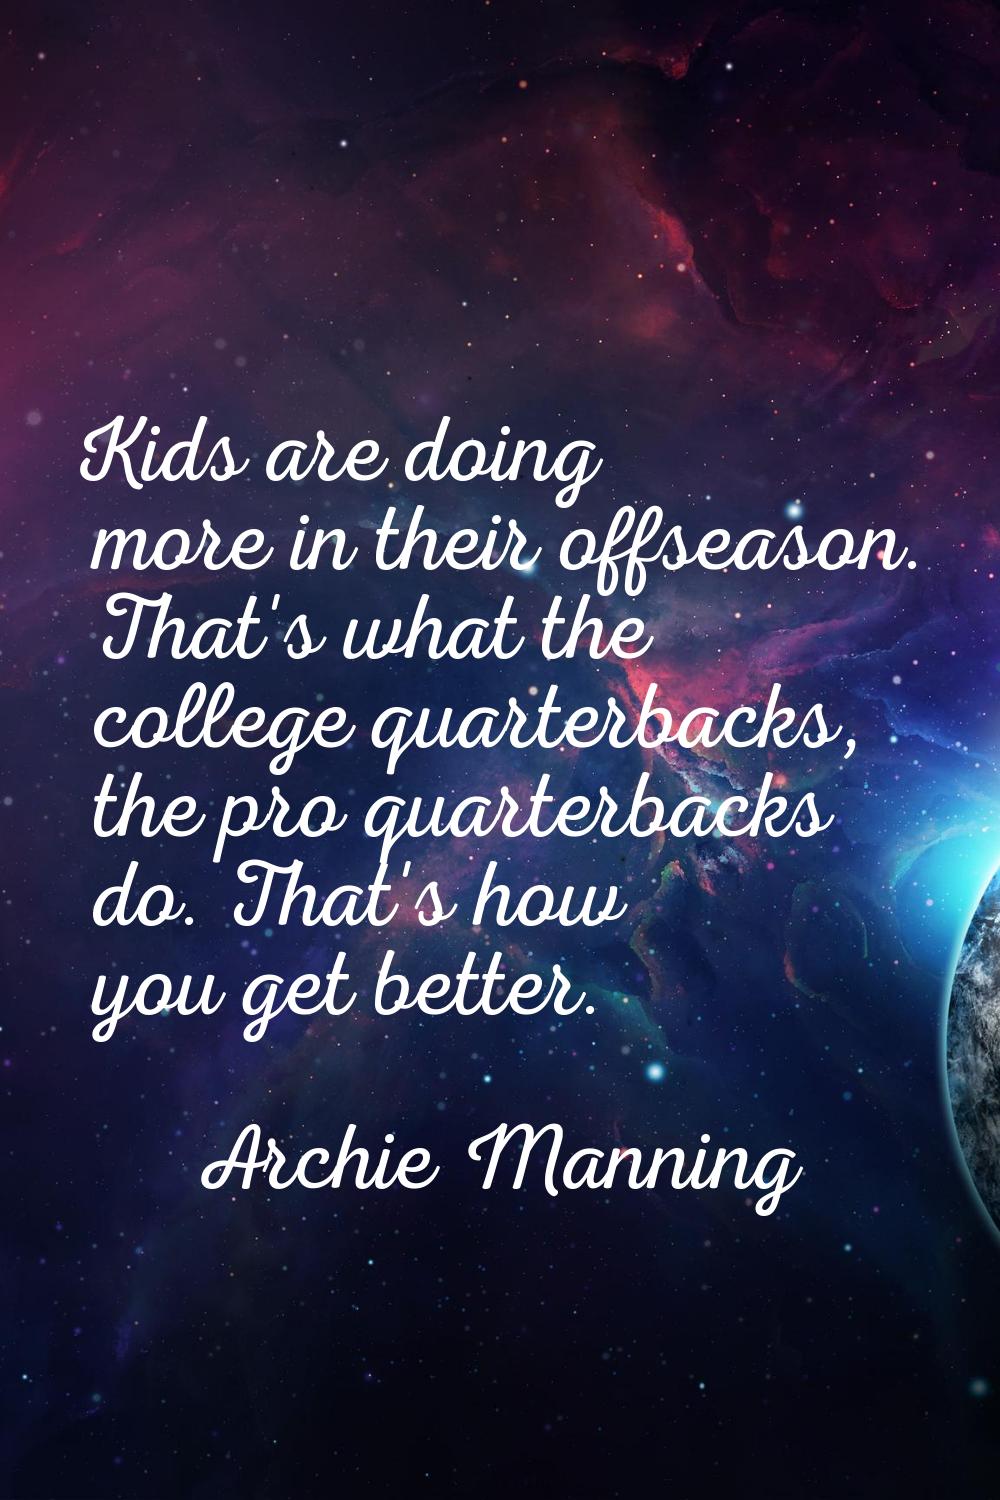 Kids are doing more in their offseason. That's what the college quarterbacks, the pro quarterbacks 